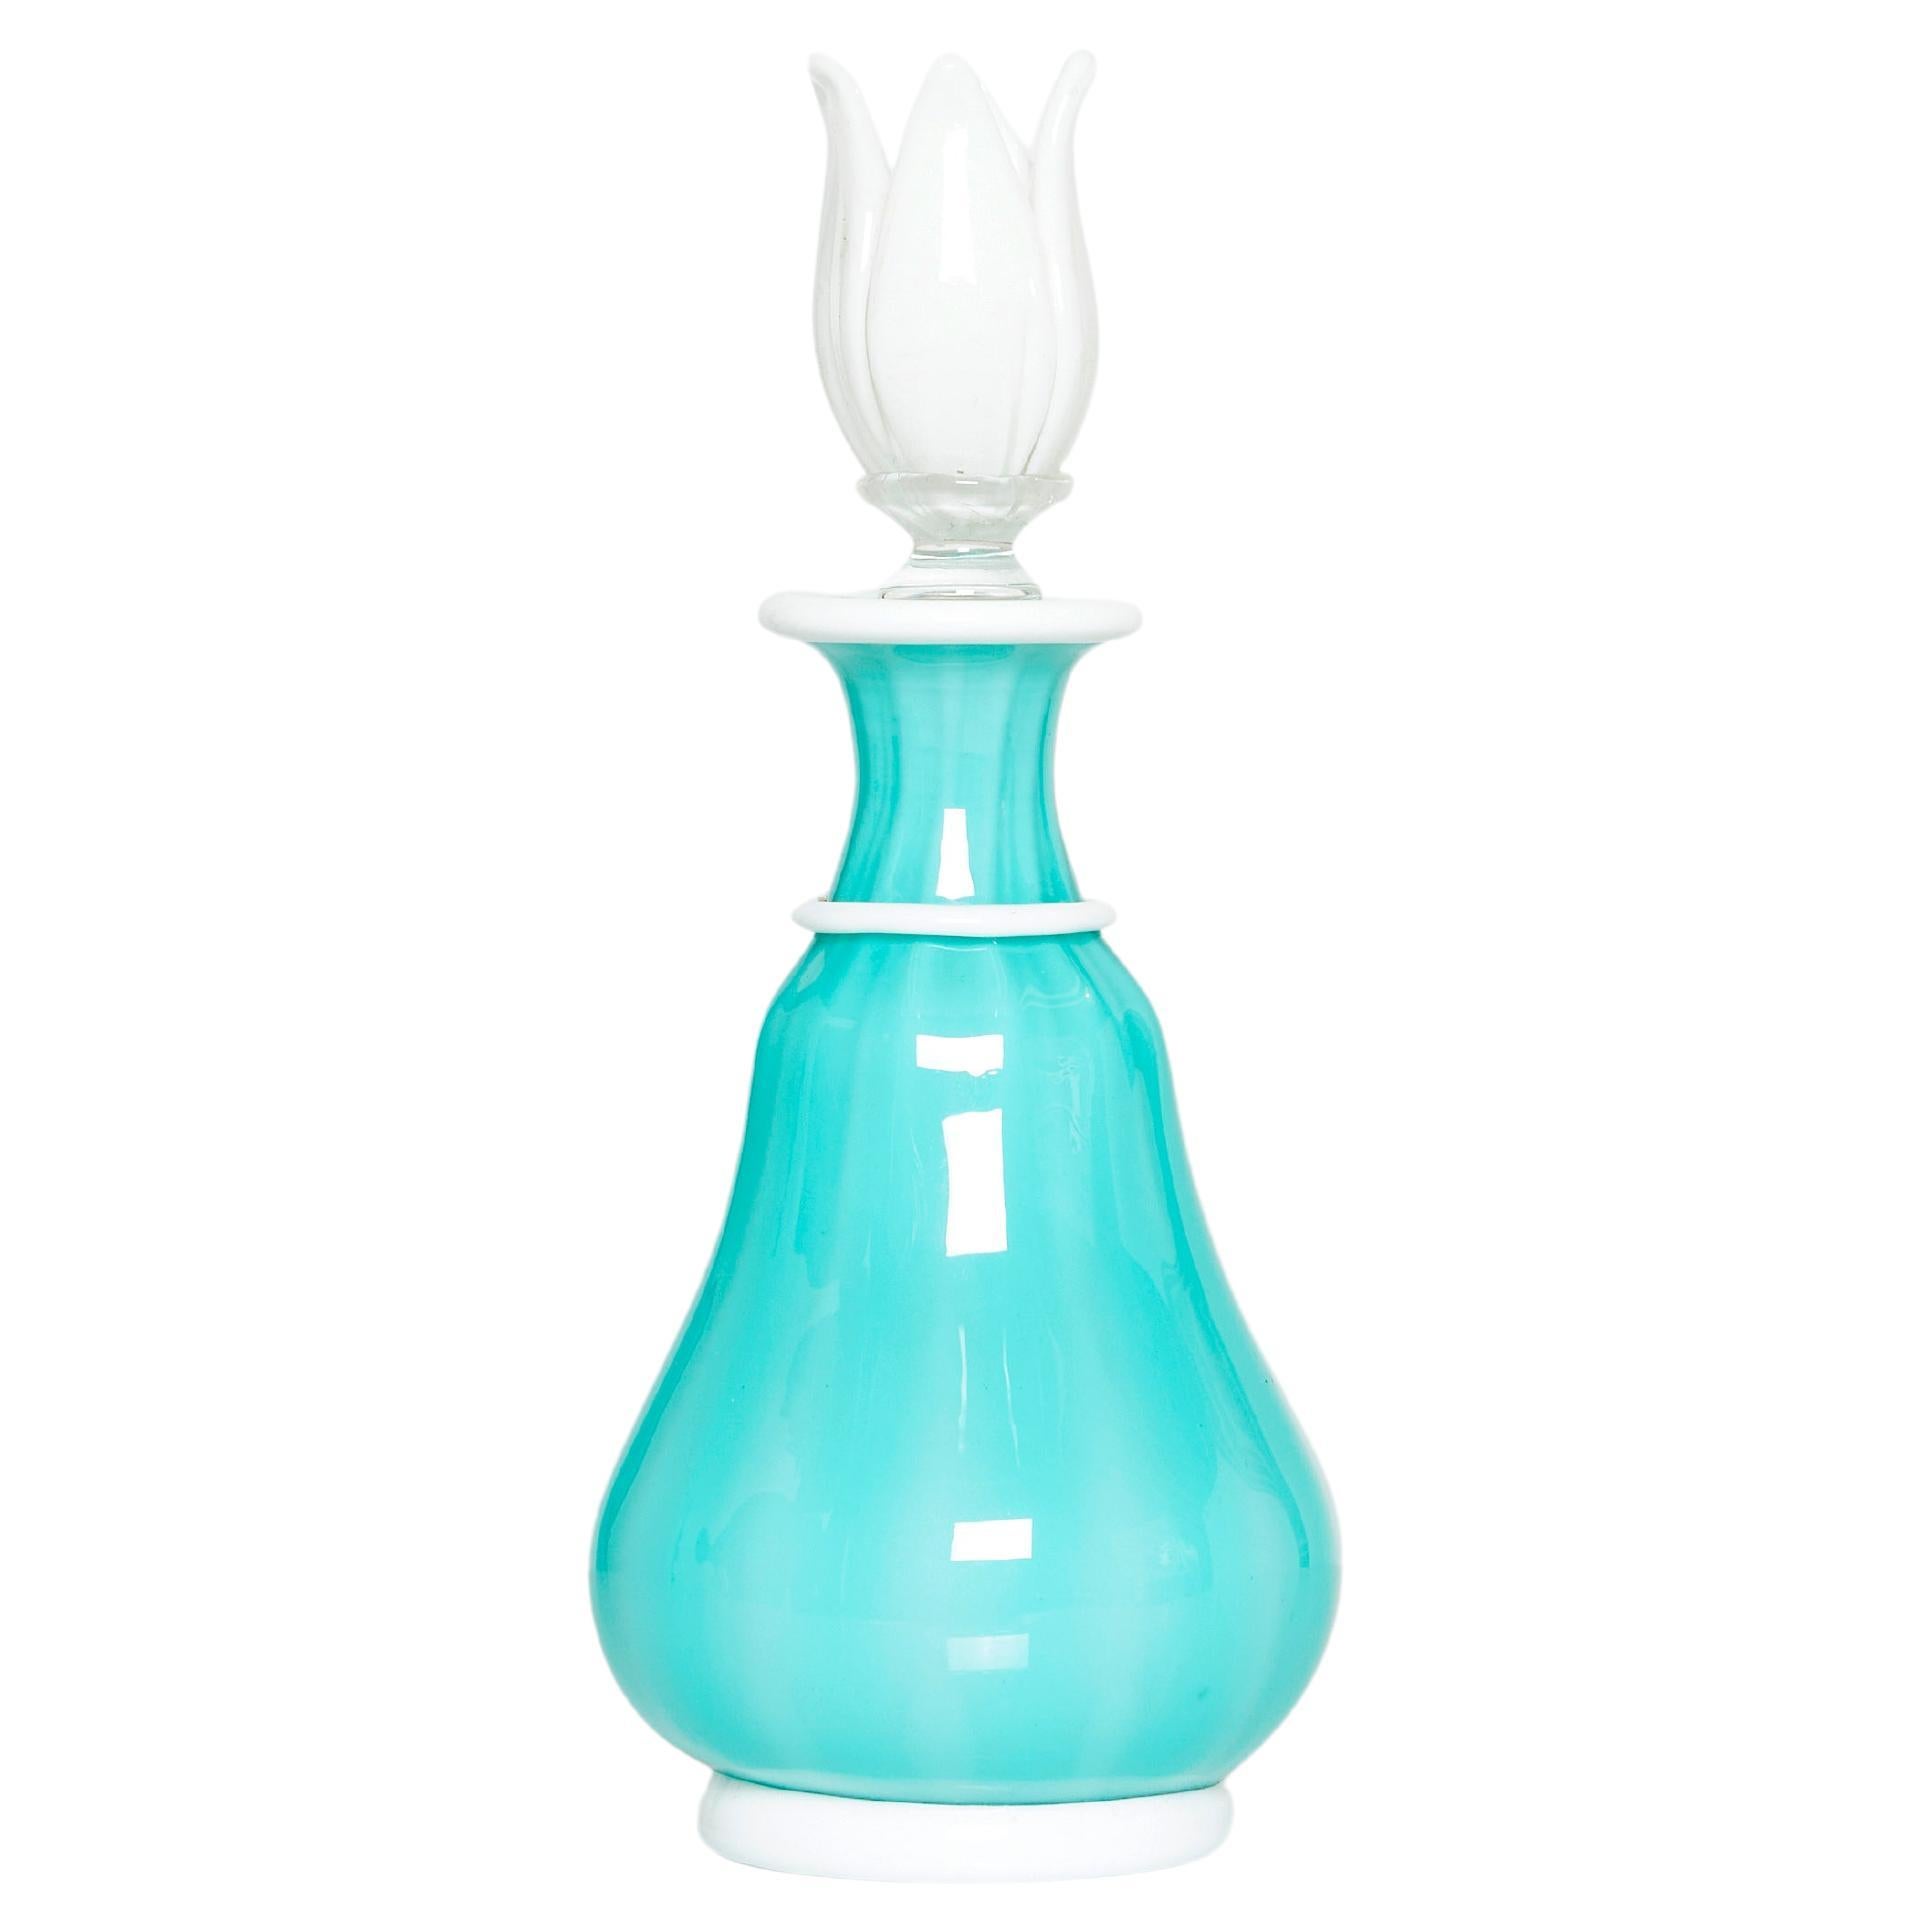 Barovier & Toso Opal Turquoise Glass Bottle Flacone with Stopper, 1950 For Sale